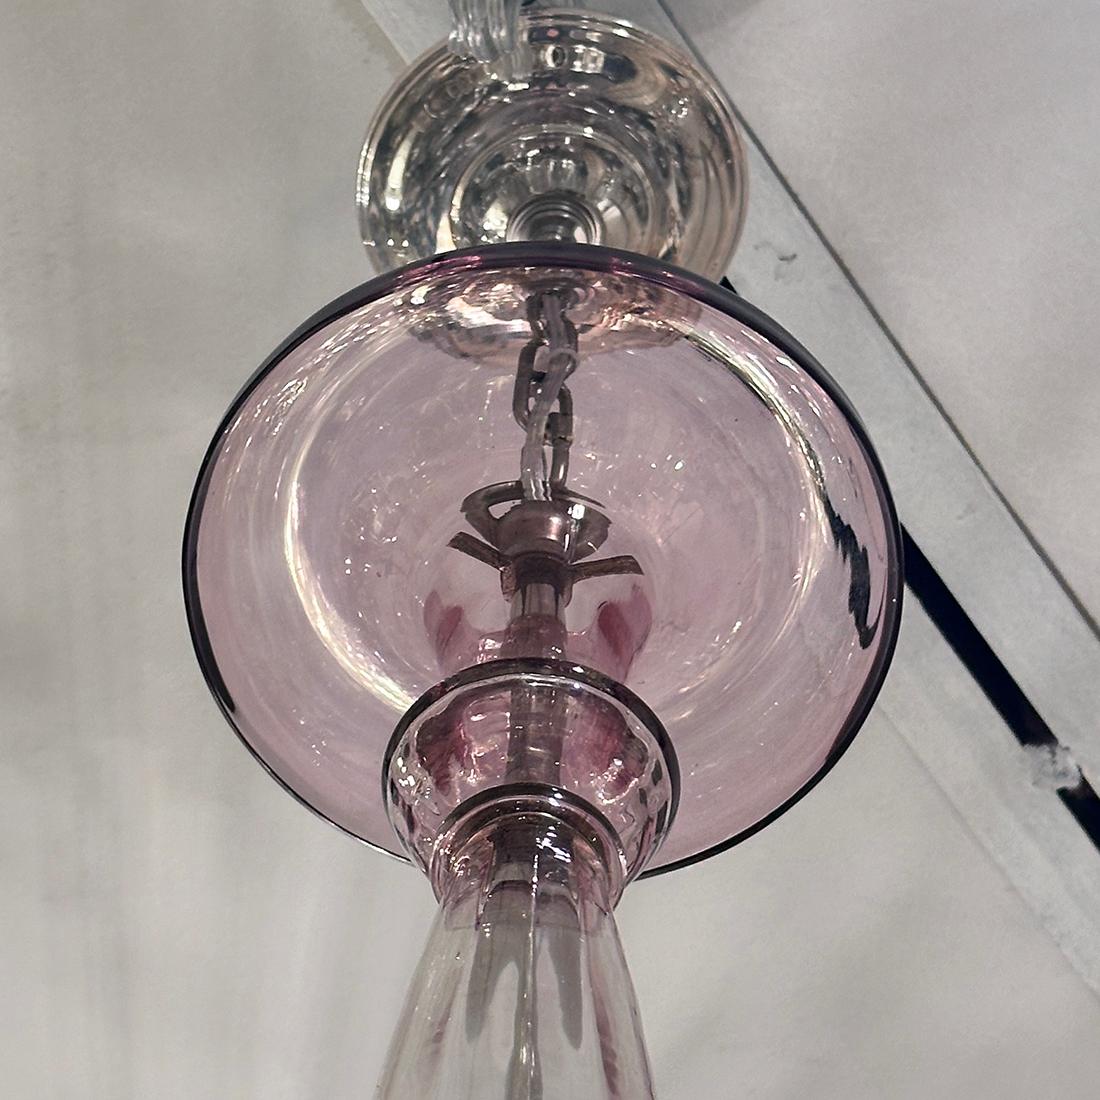 A circa 1940's amethyst glass Murano chandelier with 5 lights.

Measurements:
Height of body: 32